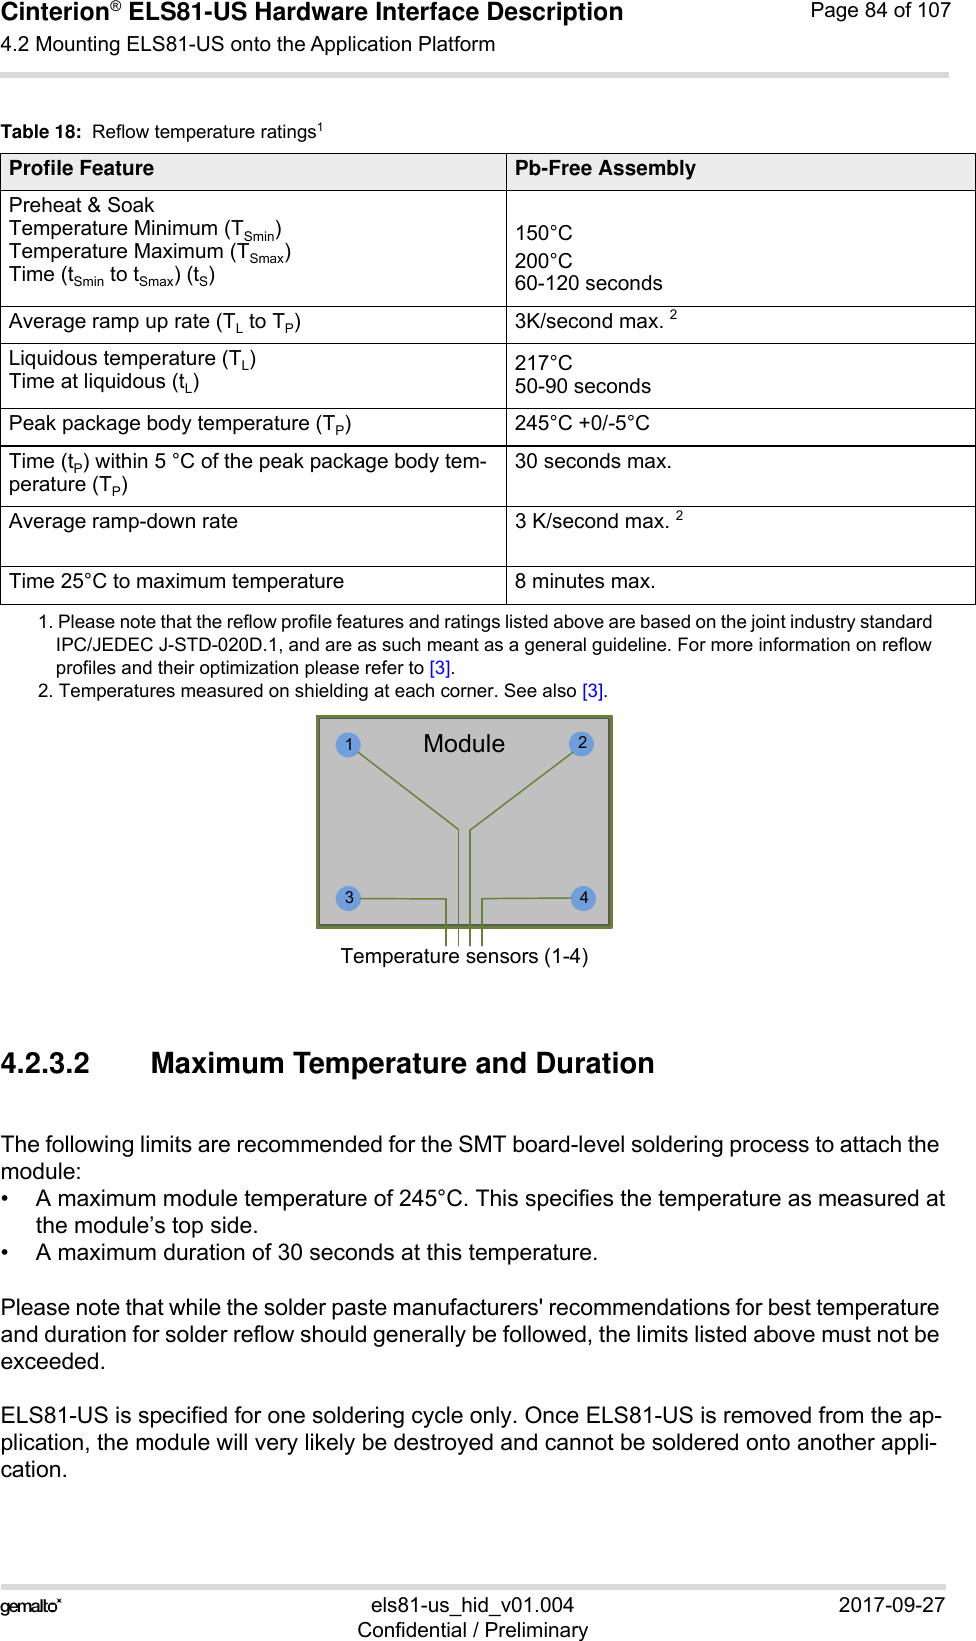 Cinterion® ELS81-US Hardware Interface Description4.2 Mounting ELS81-US onto the Application Platform92els81-us_hid_v01.004 2017-09-27Confidential / PreliminaryPage 84 of 1074.2.3.2 Maximum Temperature and DurationThe following limits are recommended for the SMT board-level soldering process to attach the module:• A maximum module temperature of 245°C. This specifies the temperature as measured atthe module’s top side.• A maximum duration of 30 seconds at this temperature.Please note that while the solder paste manufacturers&apos; recommendations for best temperature and duration for solder reflow should generally be followed, the limits listed above must not be exceeded.ELS81-US is specified for one soldering cycle only. Once ELS81-US is removed from the ap-plication, the module will very likely be destroyed and cannot be soldered onto another appli-cation.Table 18:  Reflow temperature ratings1 1. Please note that the reflow profile features and ratings listed above are based on the joint industry standard IPC/JEDEC J-STD-020D.1, and are as such meant as a general guideline. For more information on reflow profiles and their optimization please refer to [3].Profile Feature Pb-Free AssemblyPreheat &amp; SoakTemperature Minimum (TSmin)Temperature Maximum (TSmax)Time (tSmin to tSmax) (tS)150°C200°C60-120 secondsAverage ramp up rate (TL to TP) 3K/second max. 22. Temperatures measured on shielding at each corner. See also [3].Liquidous temperature (TL)Time at liquidous (tL)217°C50-90 secondsPeak package body temperature (TP)245°C +0/-5°CTime (tP) within 5 °C of the peak package body tem-perature (TP)30 seconds max.Average ramp-down rate  3 K/second max. 2Time 25°C to maximum temperature 8 minutes max.1423ModuleTemperature sensors (1-4)